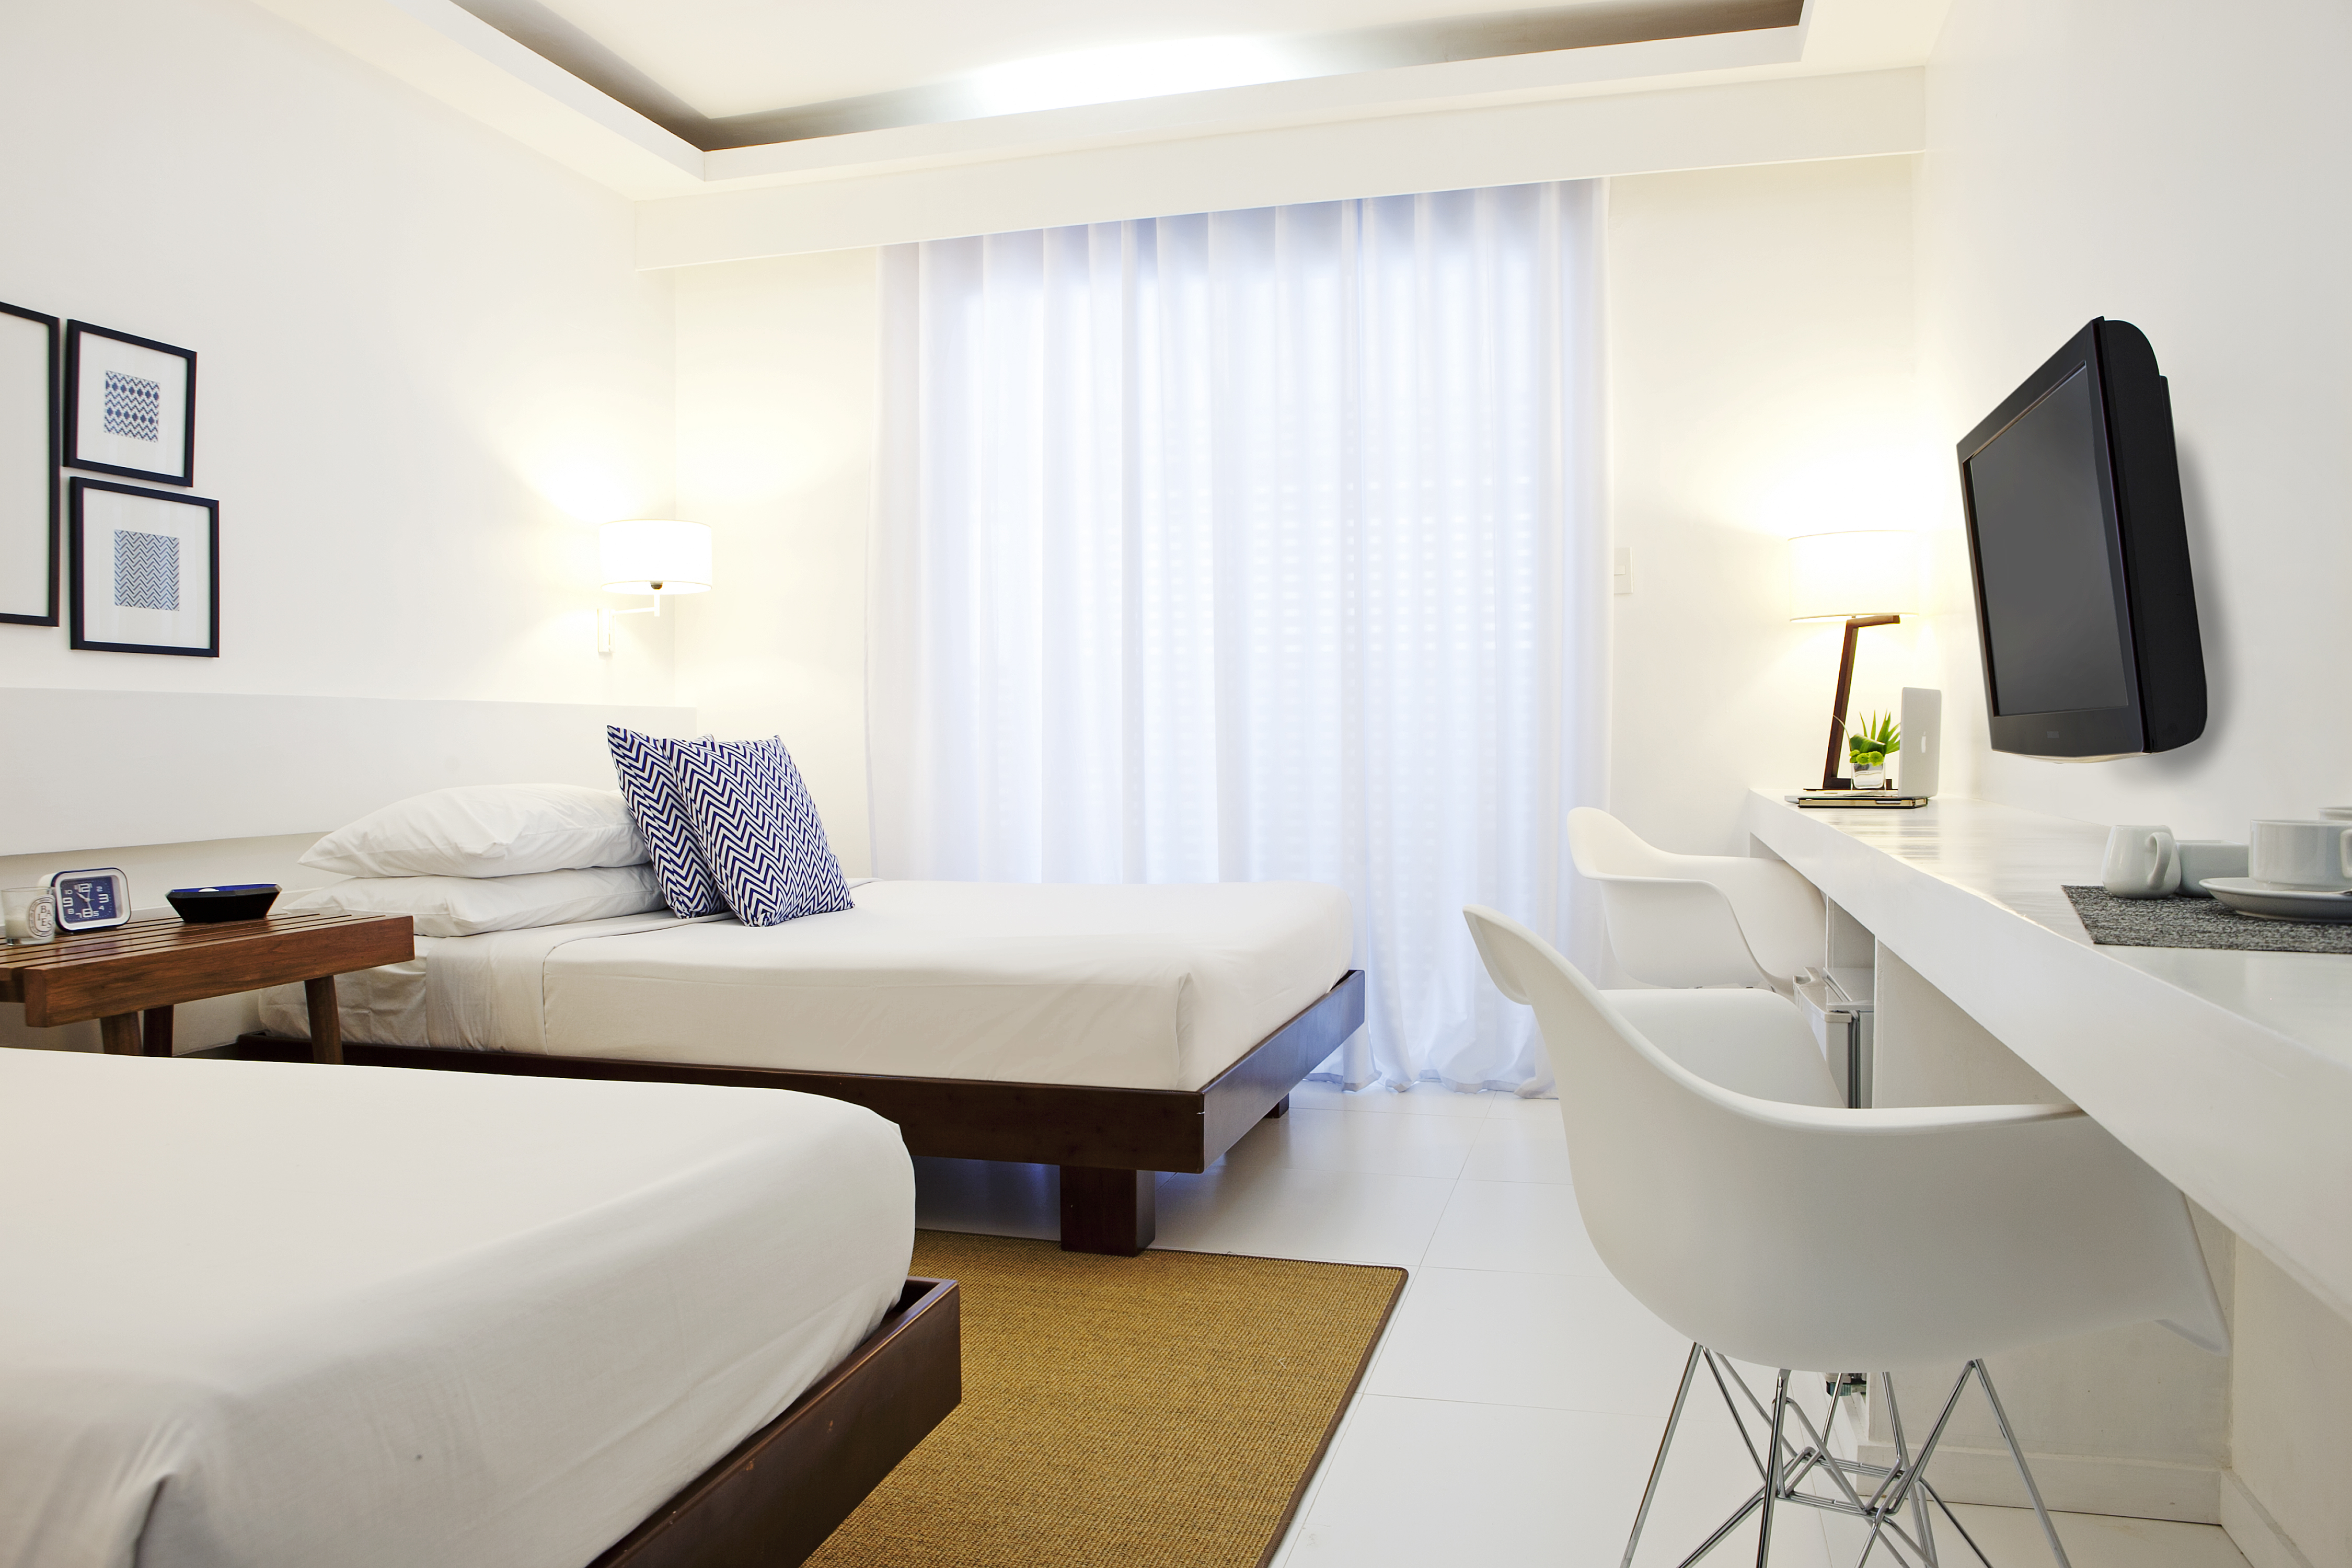 Guests will be very comfortable cocooning in Blue Marina's tastefully designed rooms.